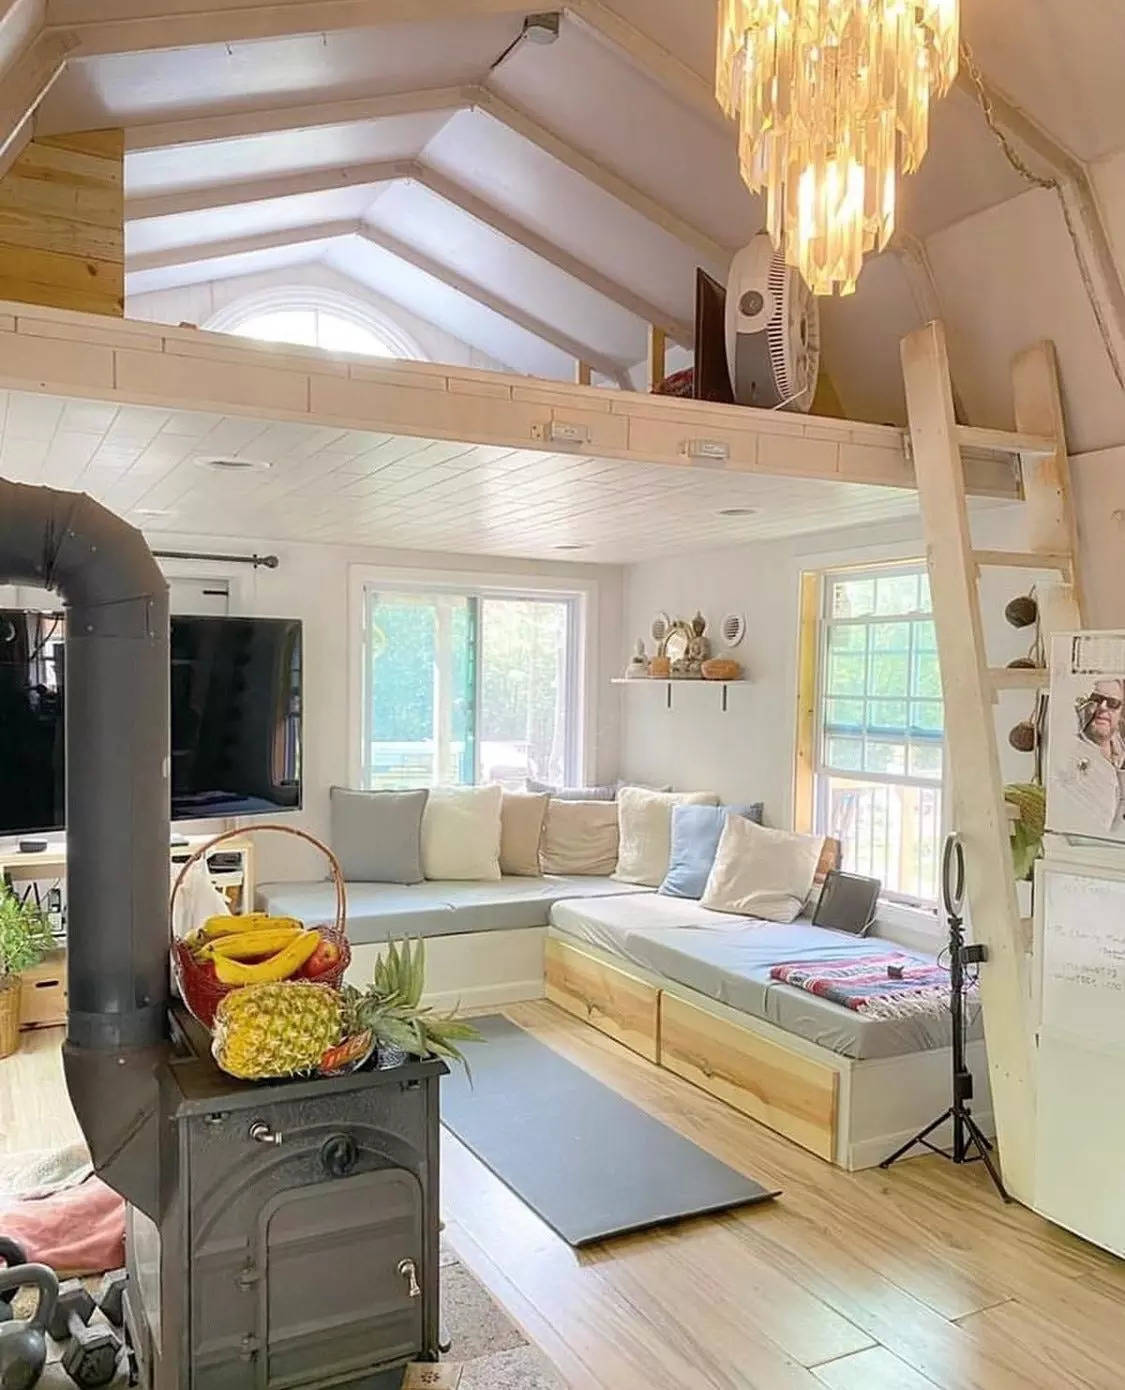 the inside of a tiny home